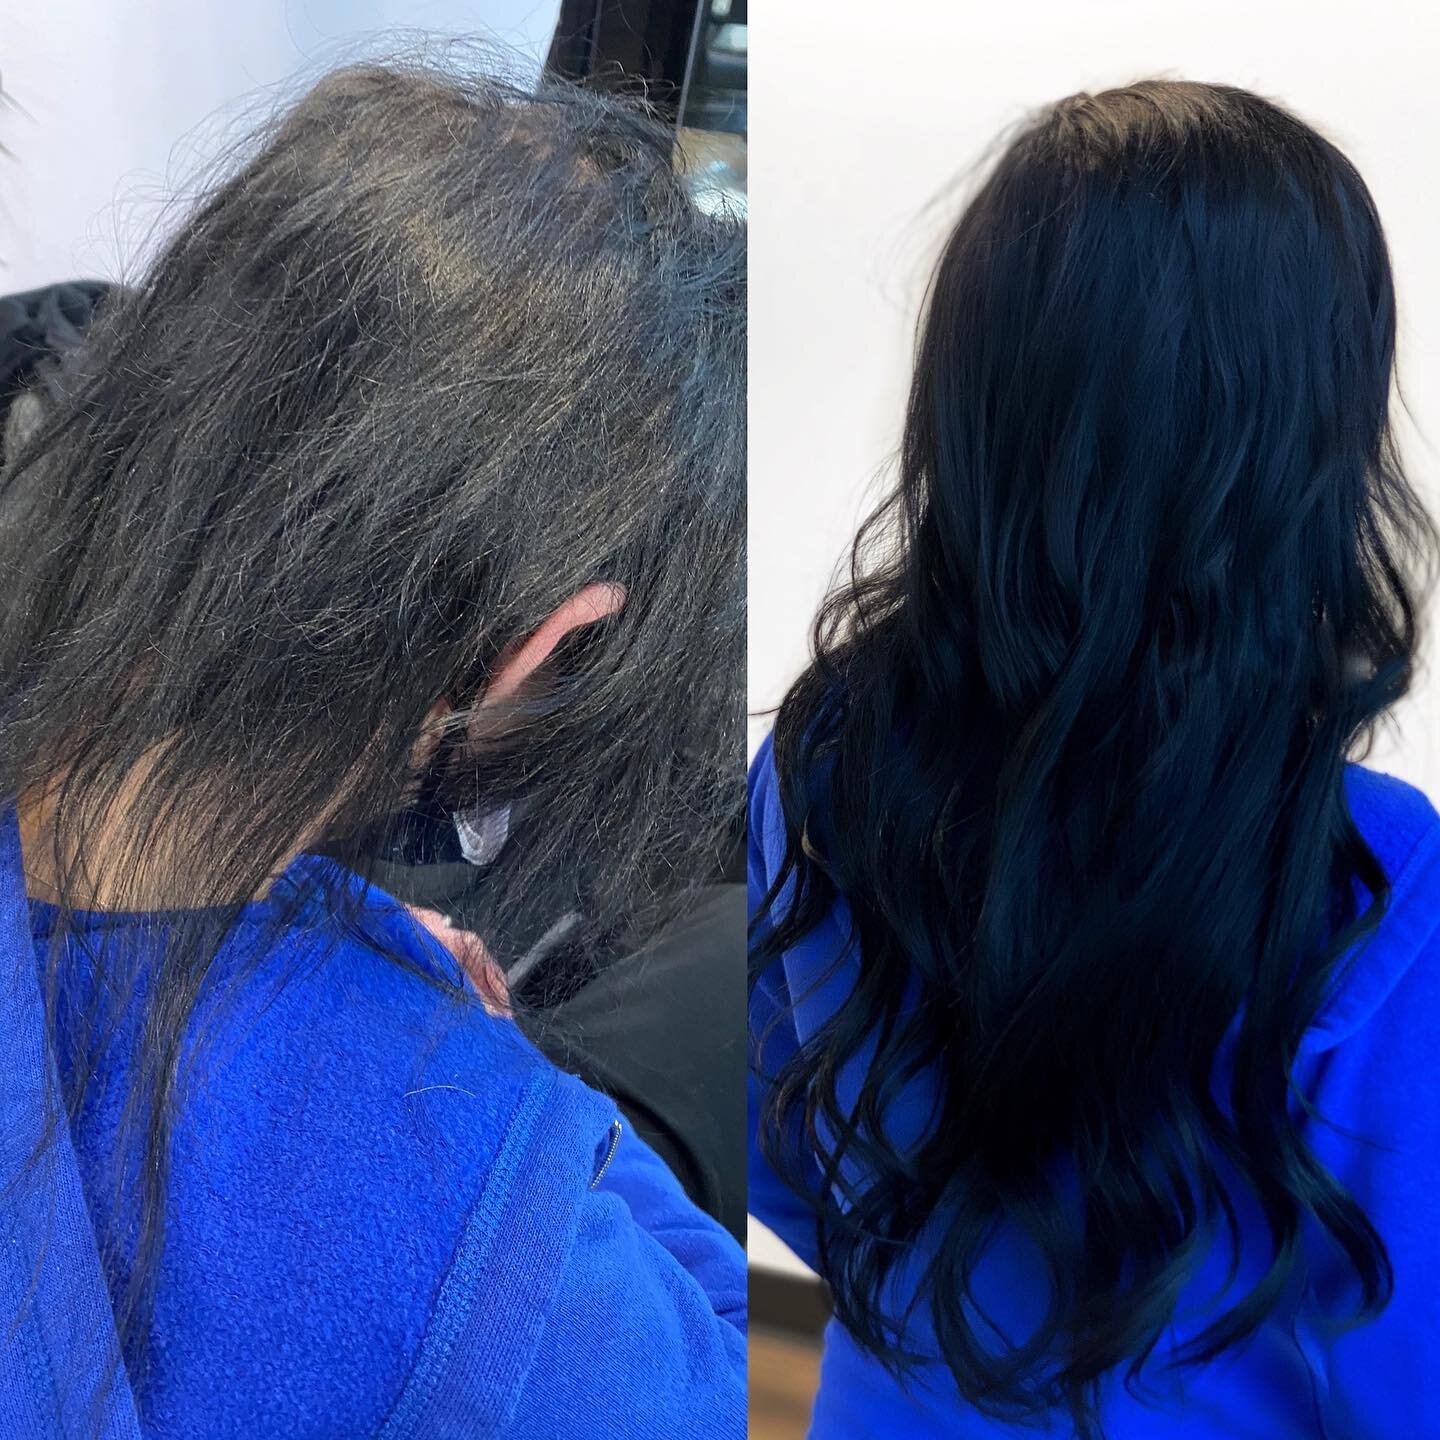 I can make your hair dreams come true. DM me to set up your extension consultation or book online from the link in my bio. #bellamihairpro #bellamiextensions #omghairtransformations